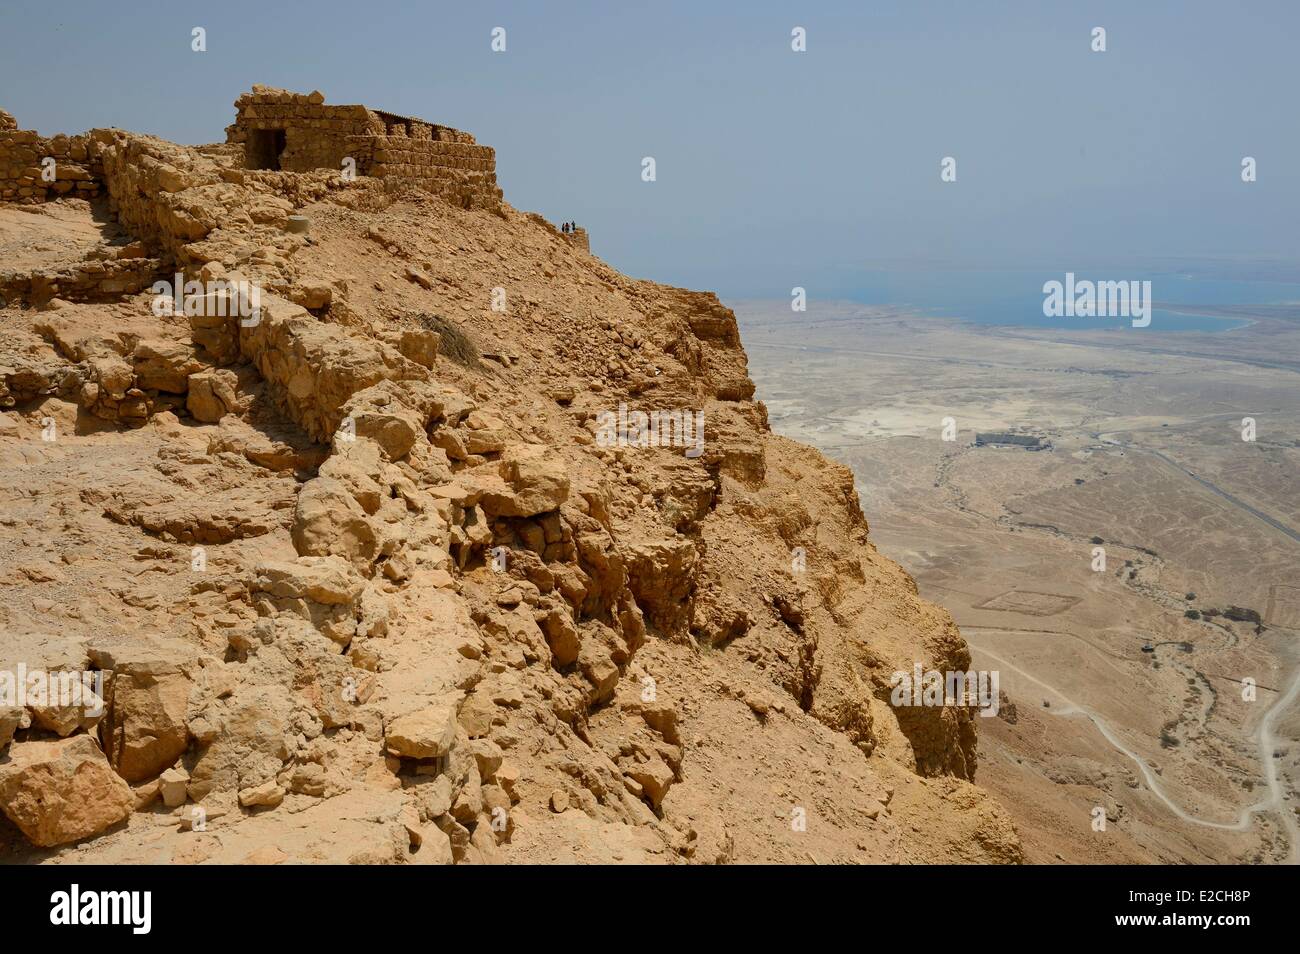 Israel, Negev Desert, Masada fortress, World Heritage by UNESCO, overlooking Dead Sea, Snake Path and remains of a Roman camp Stock Photo